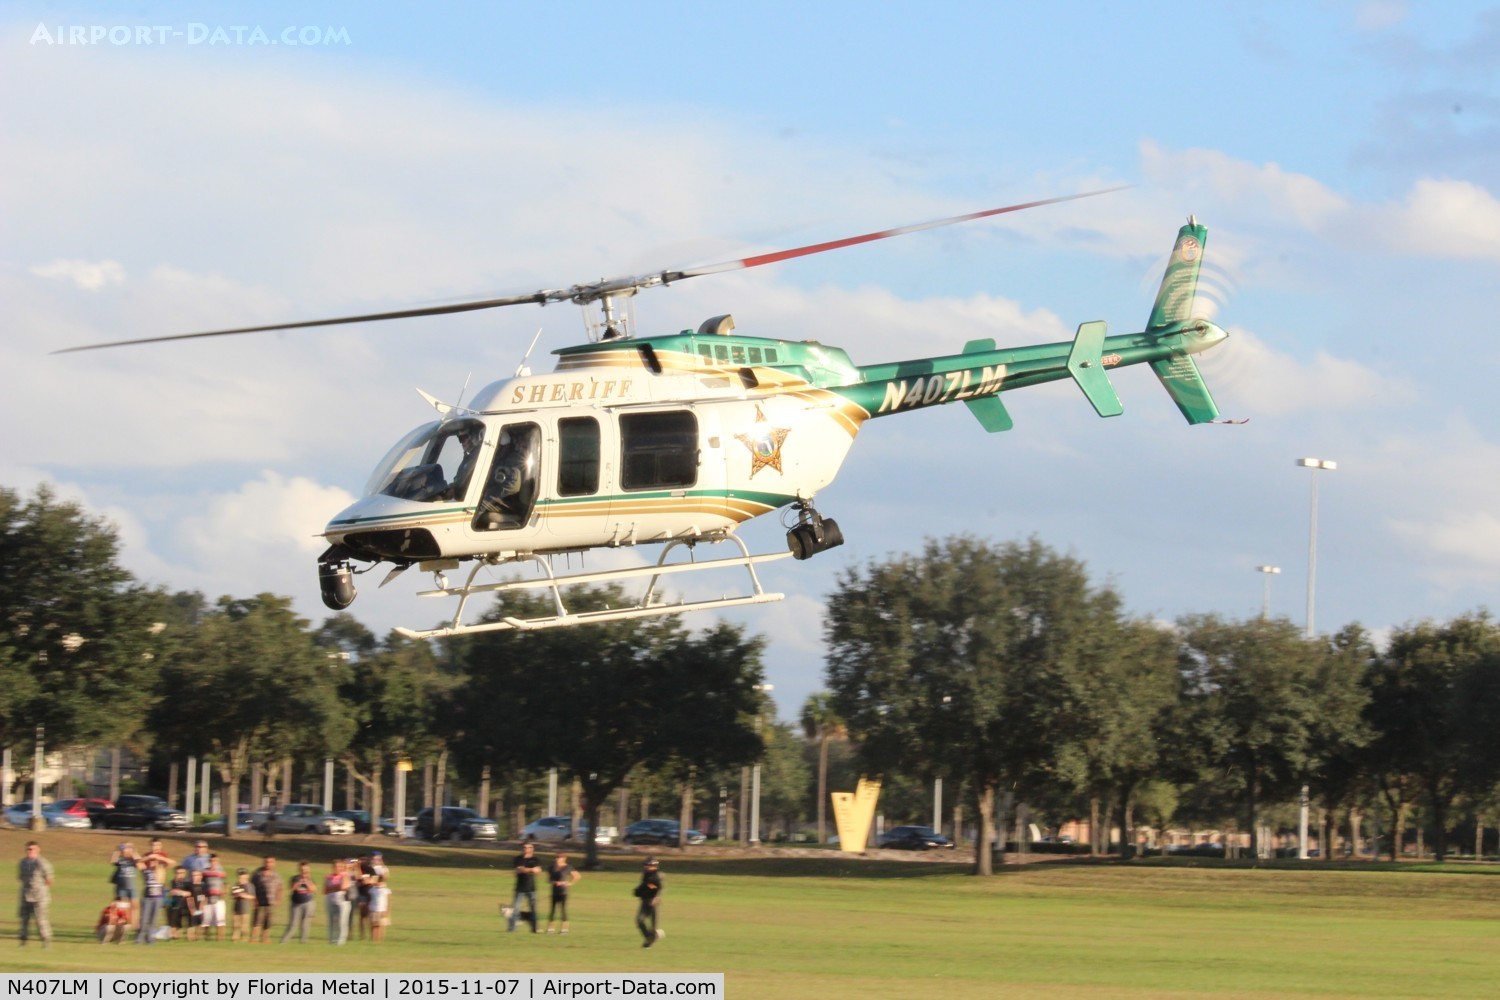 N407LM, 2007 Bell 407 C/N 53767, Bell 407 zx at Oveido